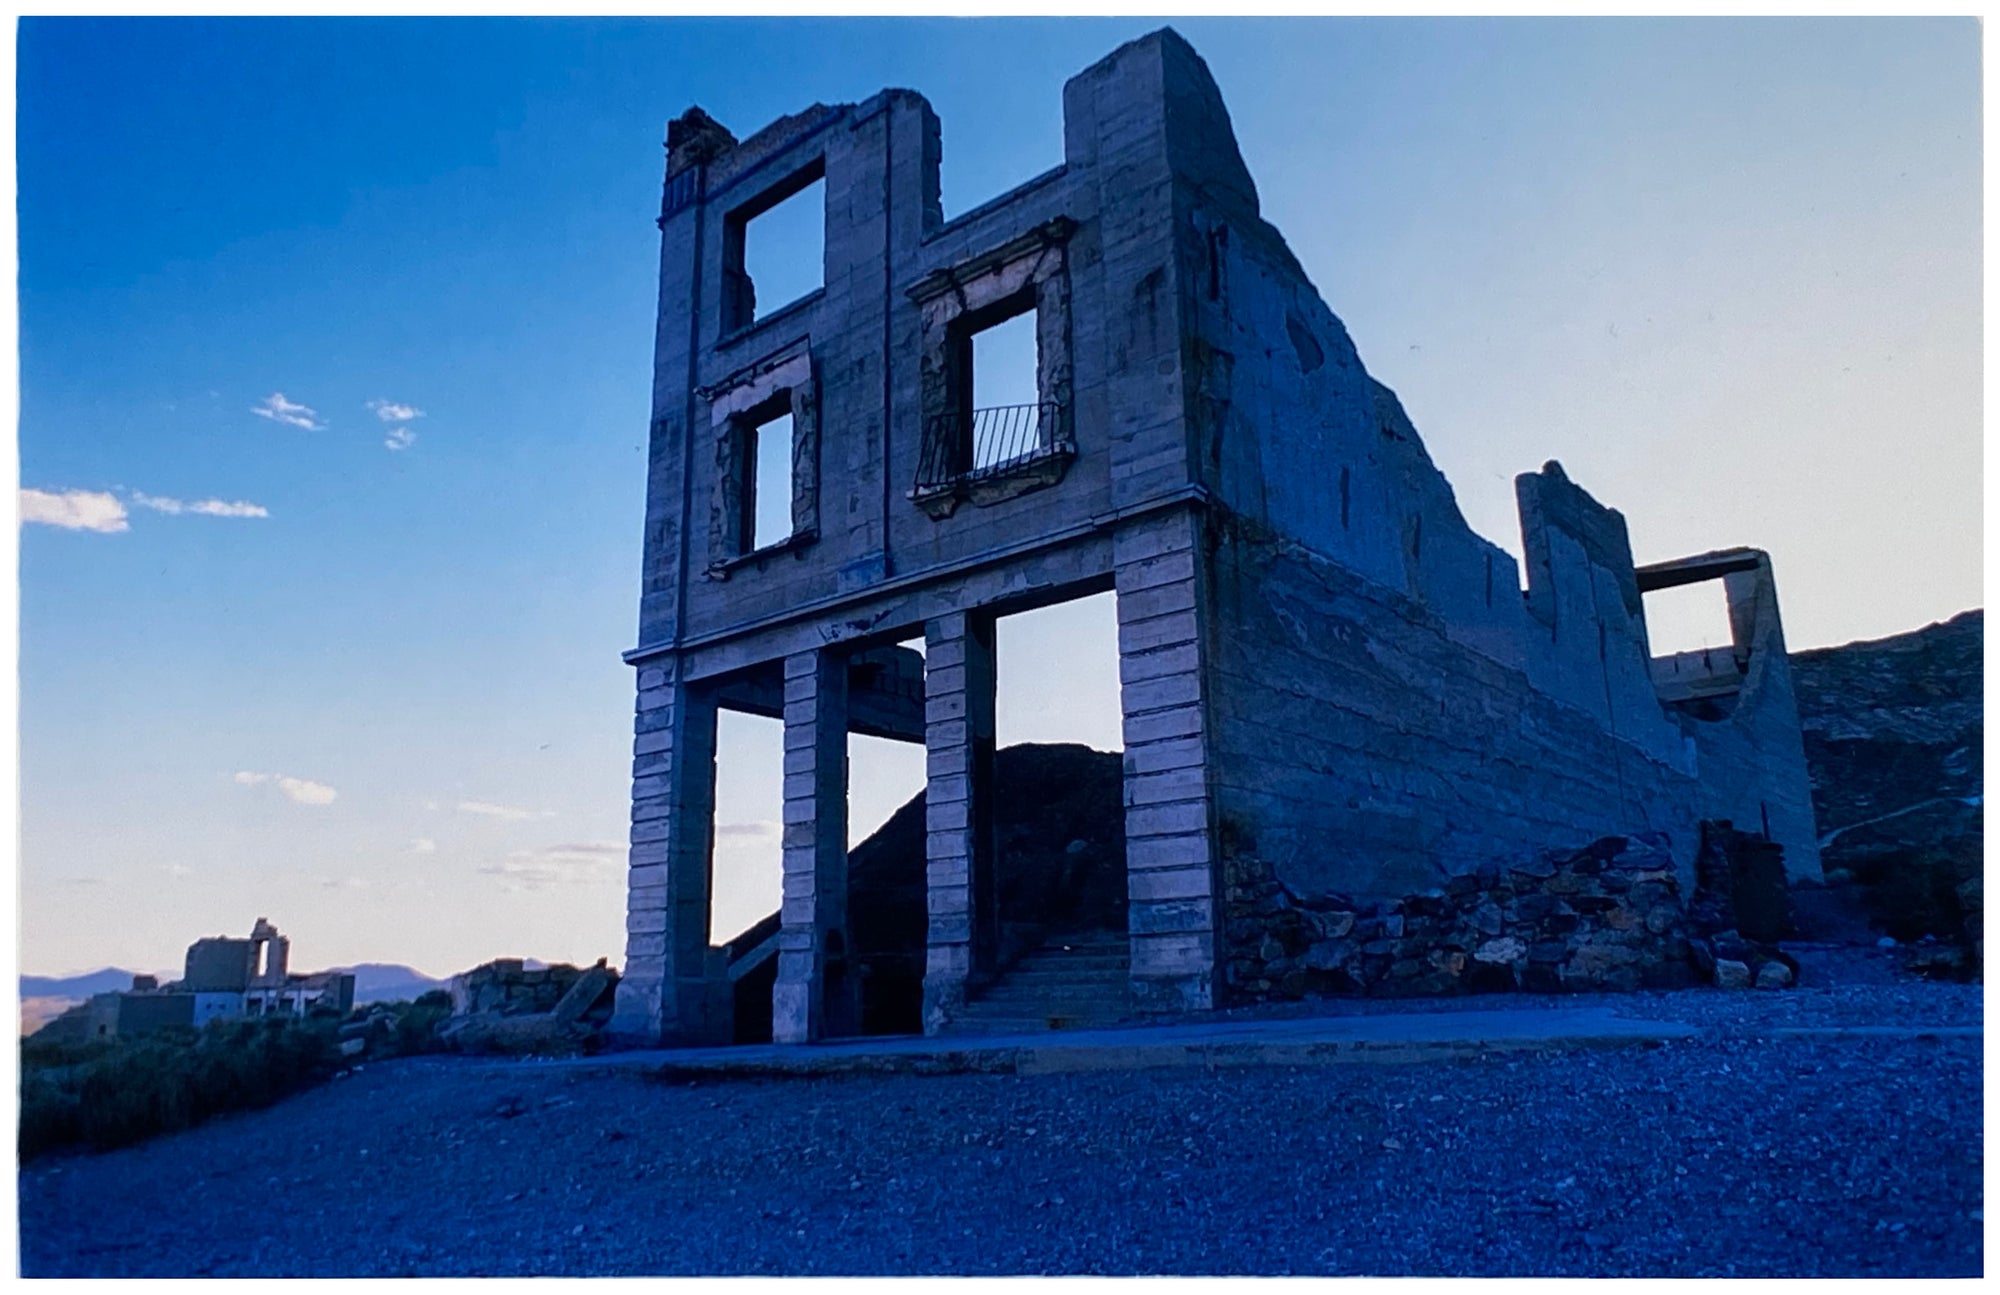 Photograph by Richard Heeps. The remnants of a rectangular building sits alone, surrounded by rubble and gravel in a blue light.